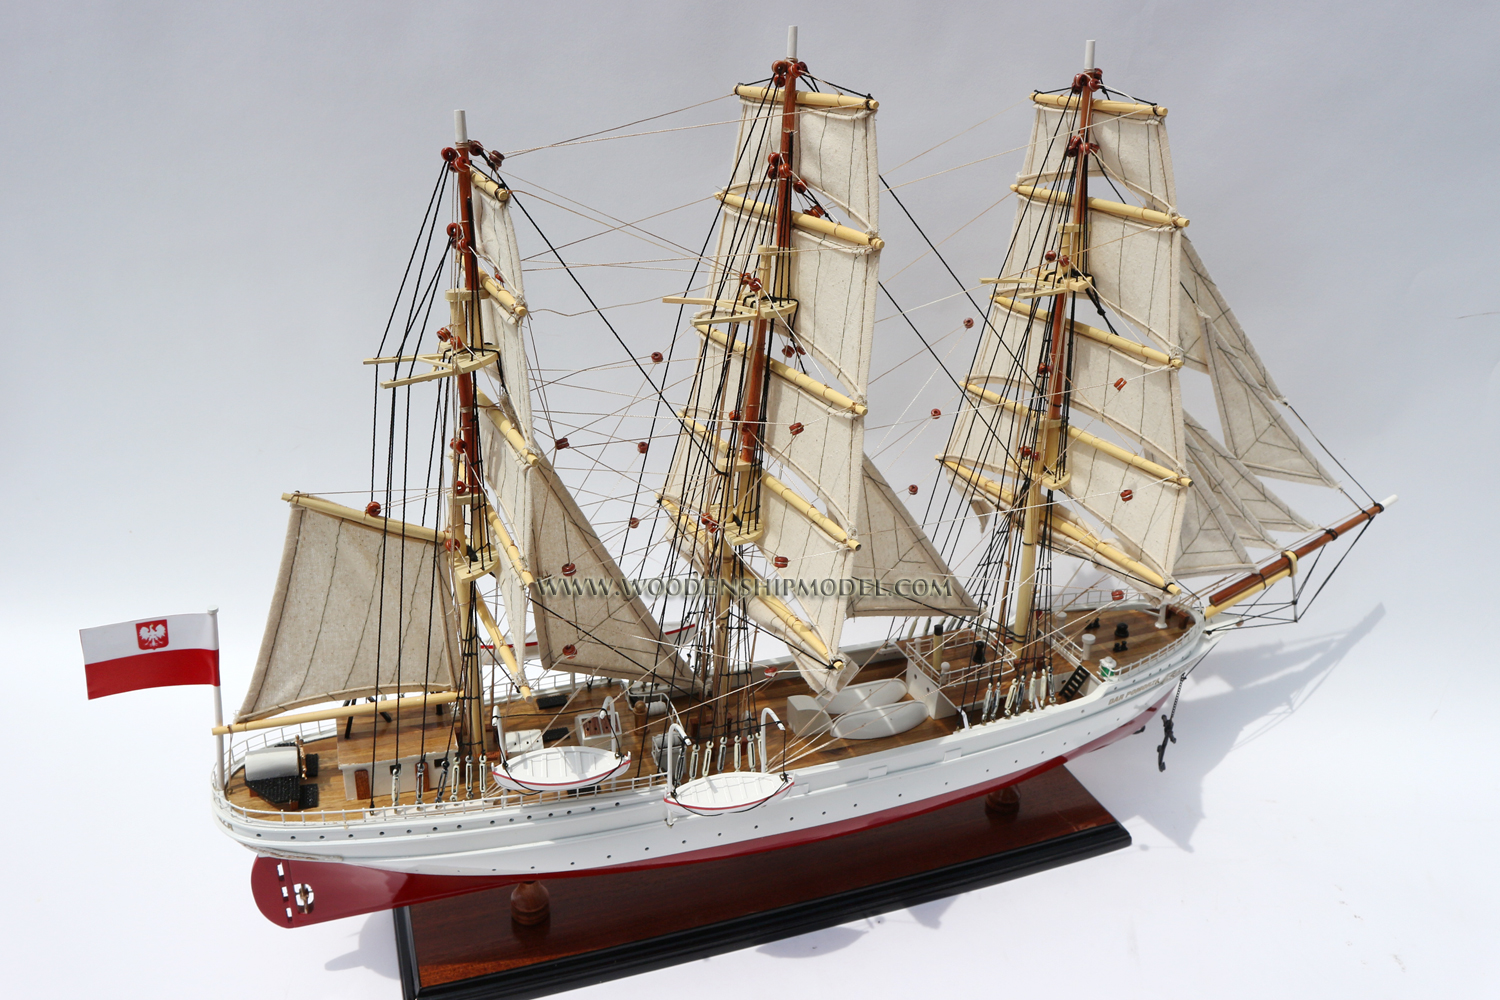 dar_pomorza ship model, Dar Pomorza ship model, model ship Dar Pomorza, handcrafted Russian ship model, handcrafted Dar Pomorza model ship, display Dar Pomorza ship model, scratch build Dar Pomorza ship model, russian historic ship model Dar Pomorza, display historic ship model, wooden model ship Dar Pomorza for display, dar_pomorza - Russian sailing ship of the line I rank, was set afloat on the Nikolaev shipyard in 1841 . Subsequently, the stocks went down two similar ships, " Paris "( 1849 ) and " The Grand Duke Constantine "( 1852 ). Was part of the Black Sea Fleet , took part in the defense of Sevastopol , during which in February 1855 was flooded. In autumn 1861 , after a failed attempt to climb blown up. Depicted on the eight paintings I. Aivazovsky , including the painting "The Ship" dar_pomorza "," ( 1897 ).